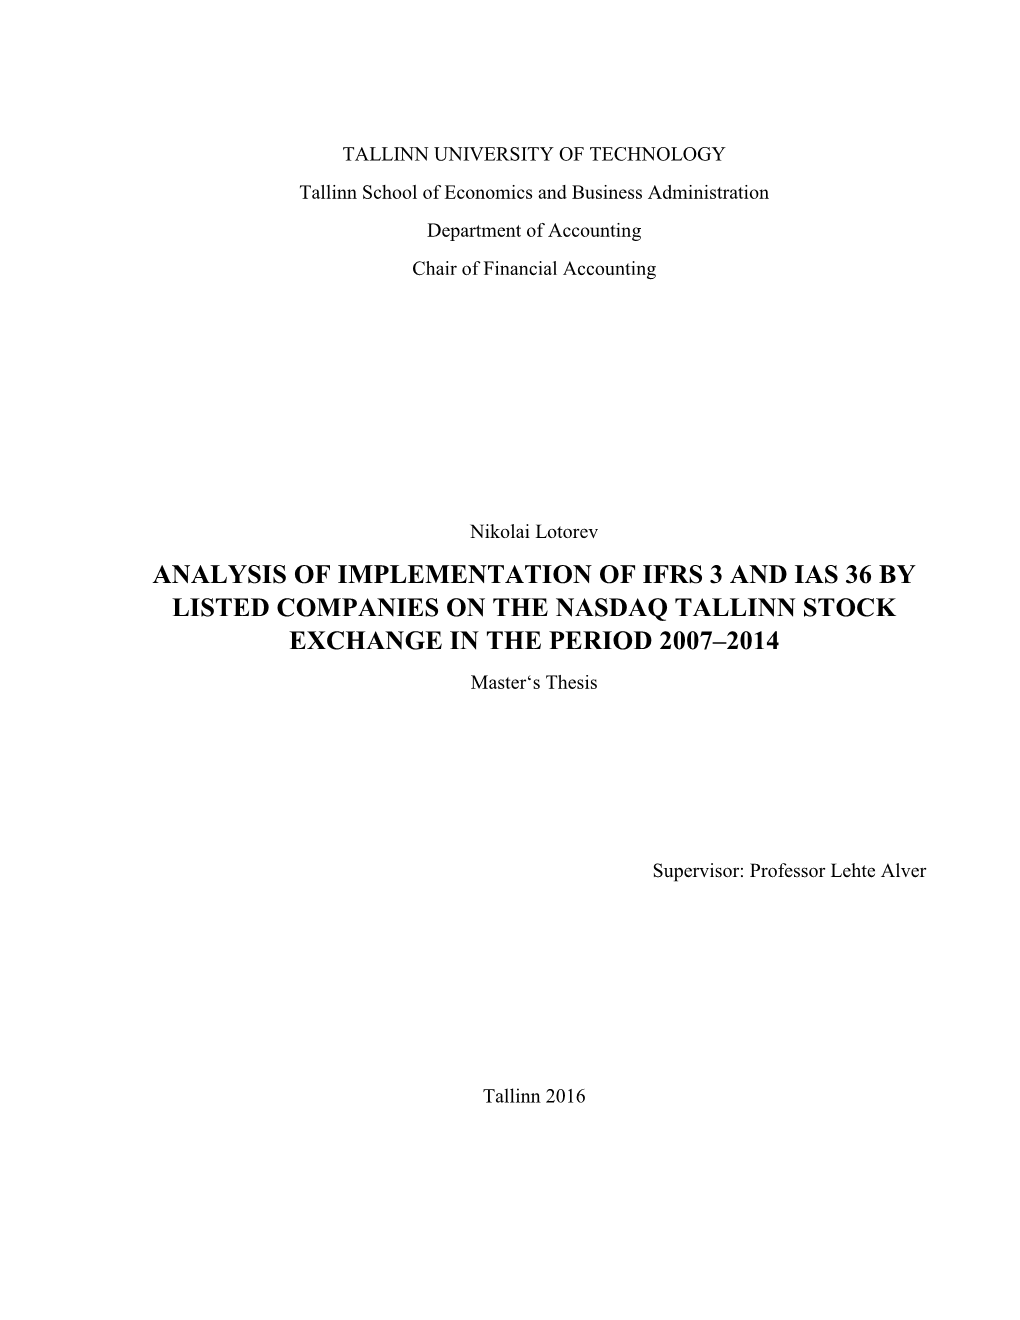 ANALYSIS of IMPLEMENTATION of IFRS 3 and IAS 36 by LISTED COMPANIES on the NASDAQ TALLINN STOCK EXCHANGE in the PERIOD 2007–2014 Master‘S Thesis